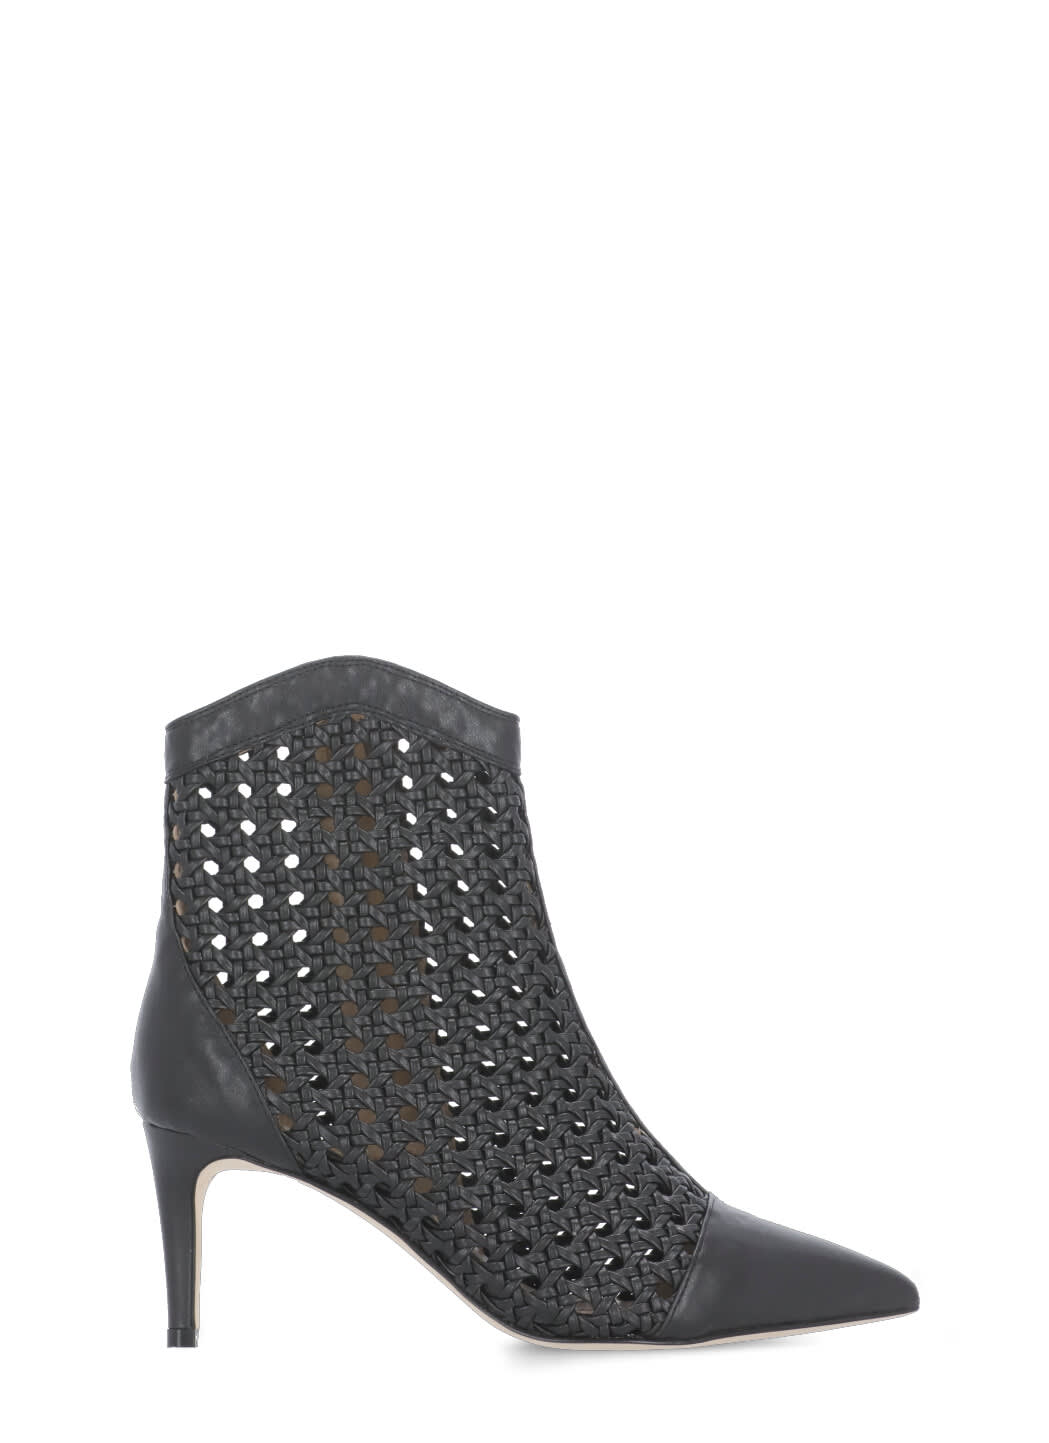 Marella Braided Leather Ankle Boot